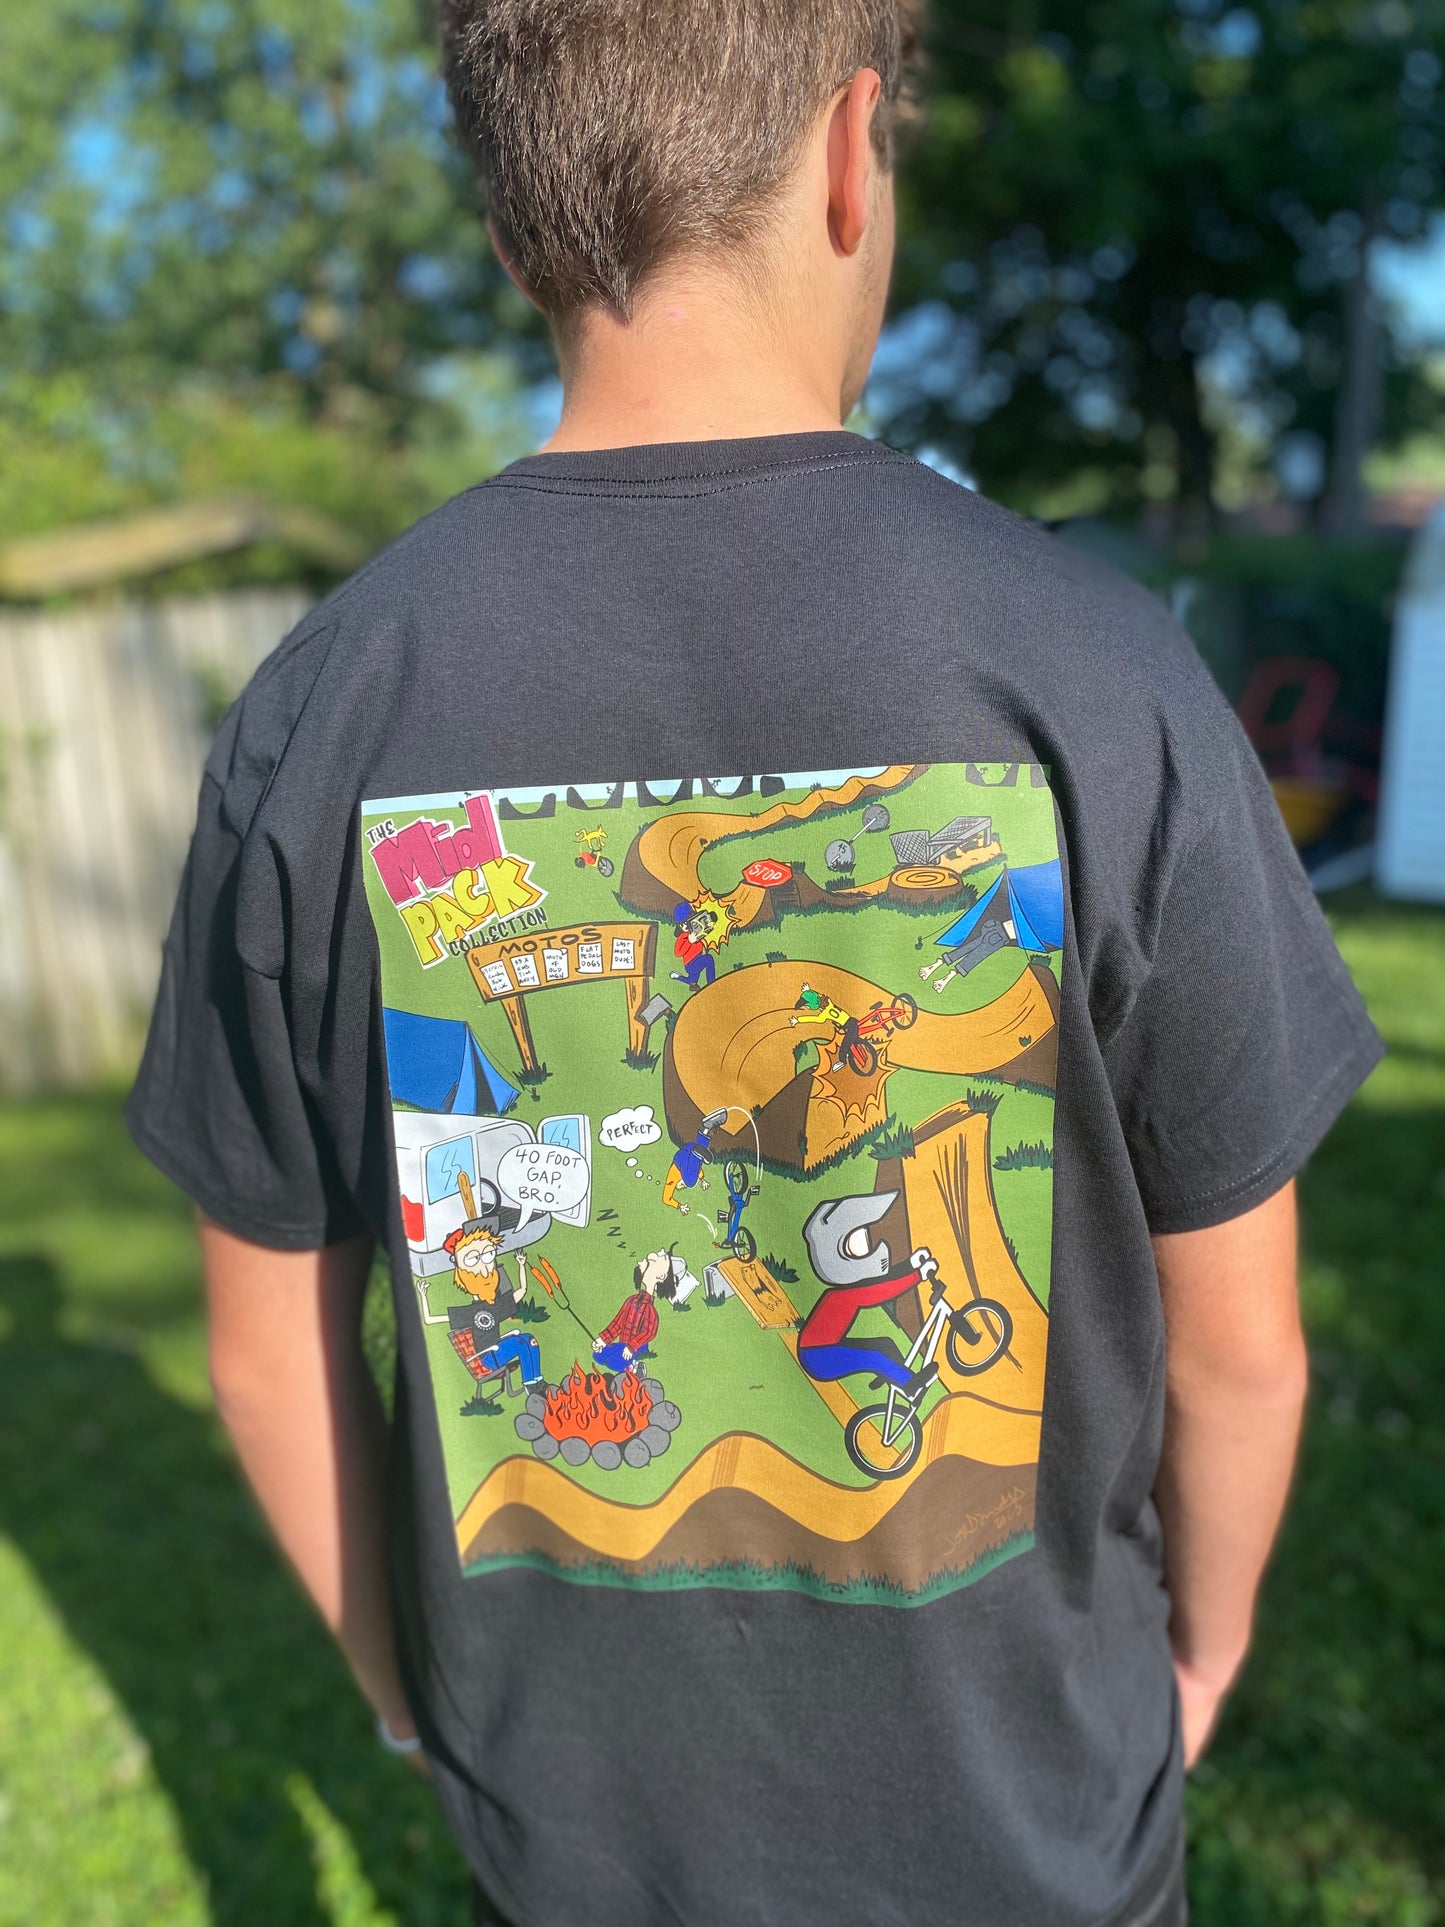 BMX Backyard Tee / Mid-Pack Collection Volume 1